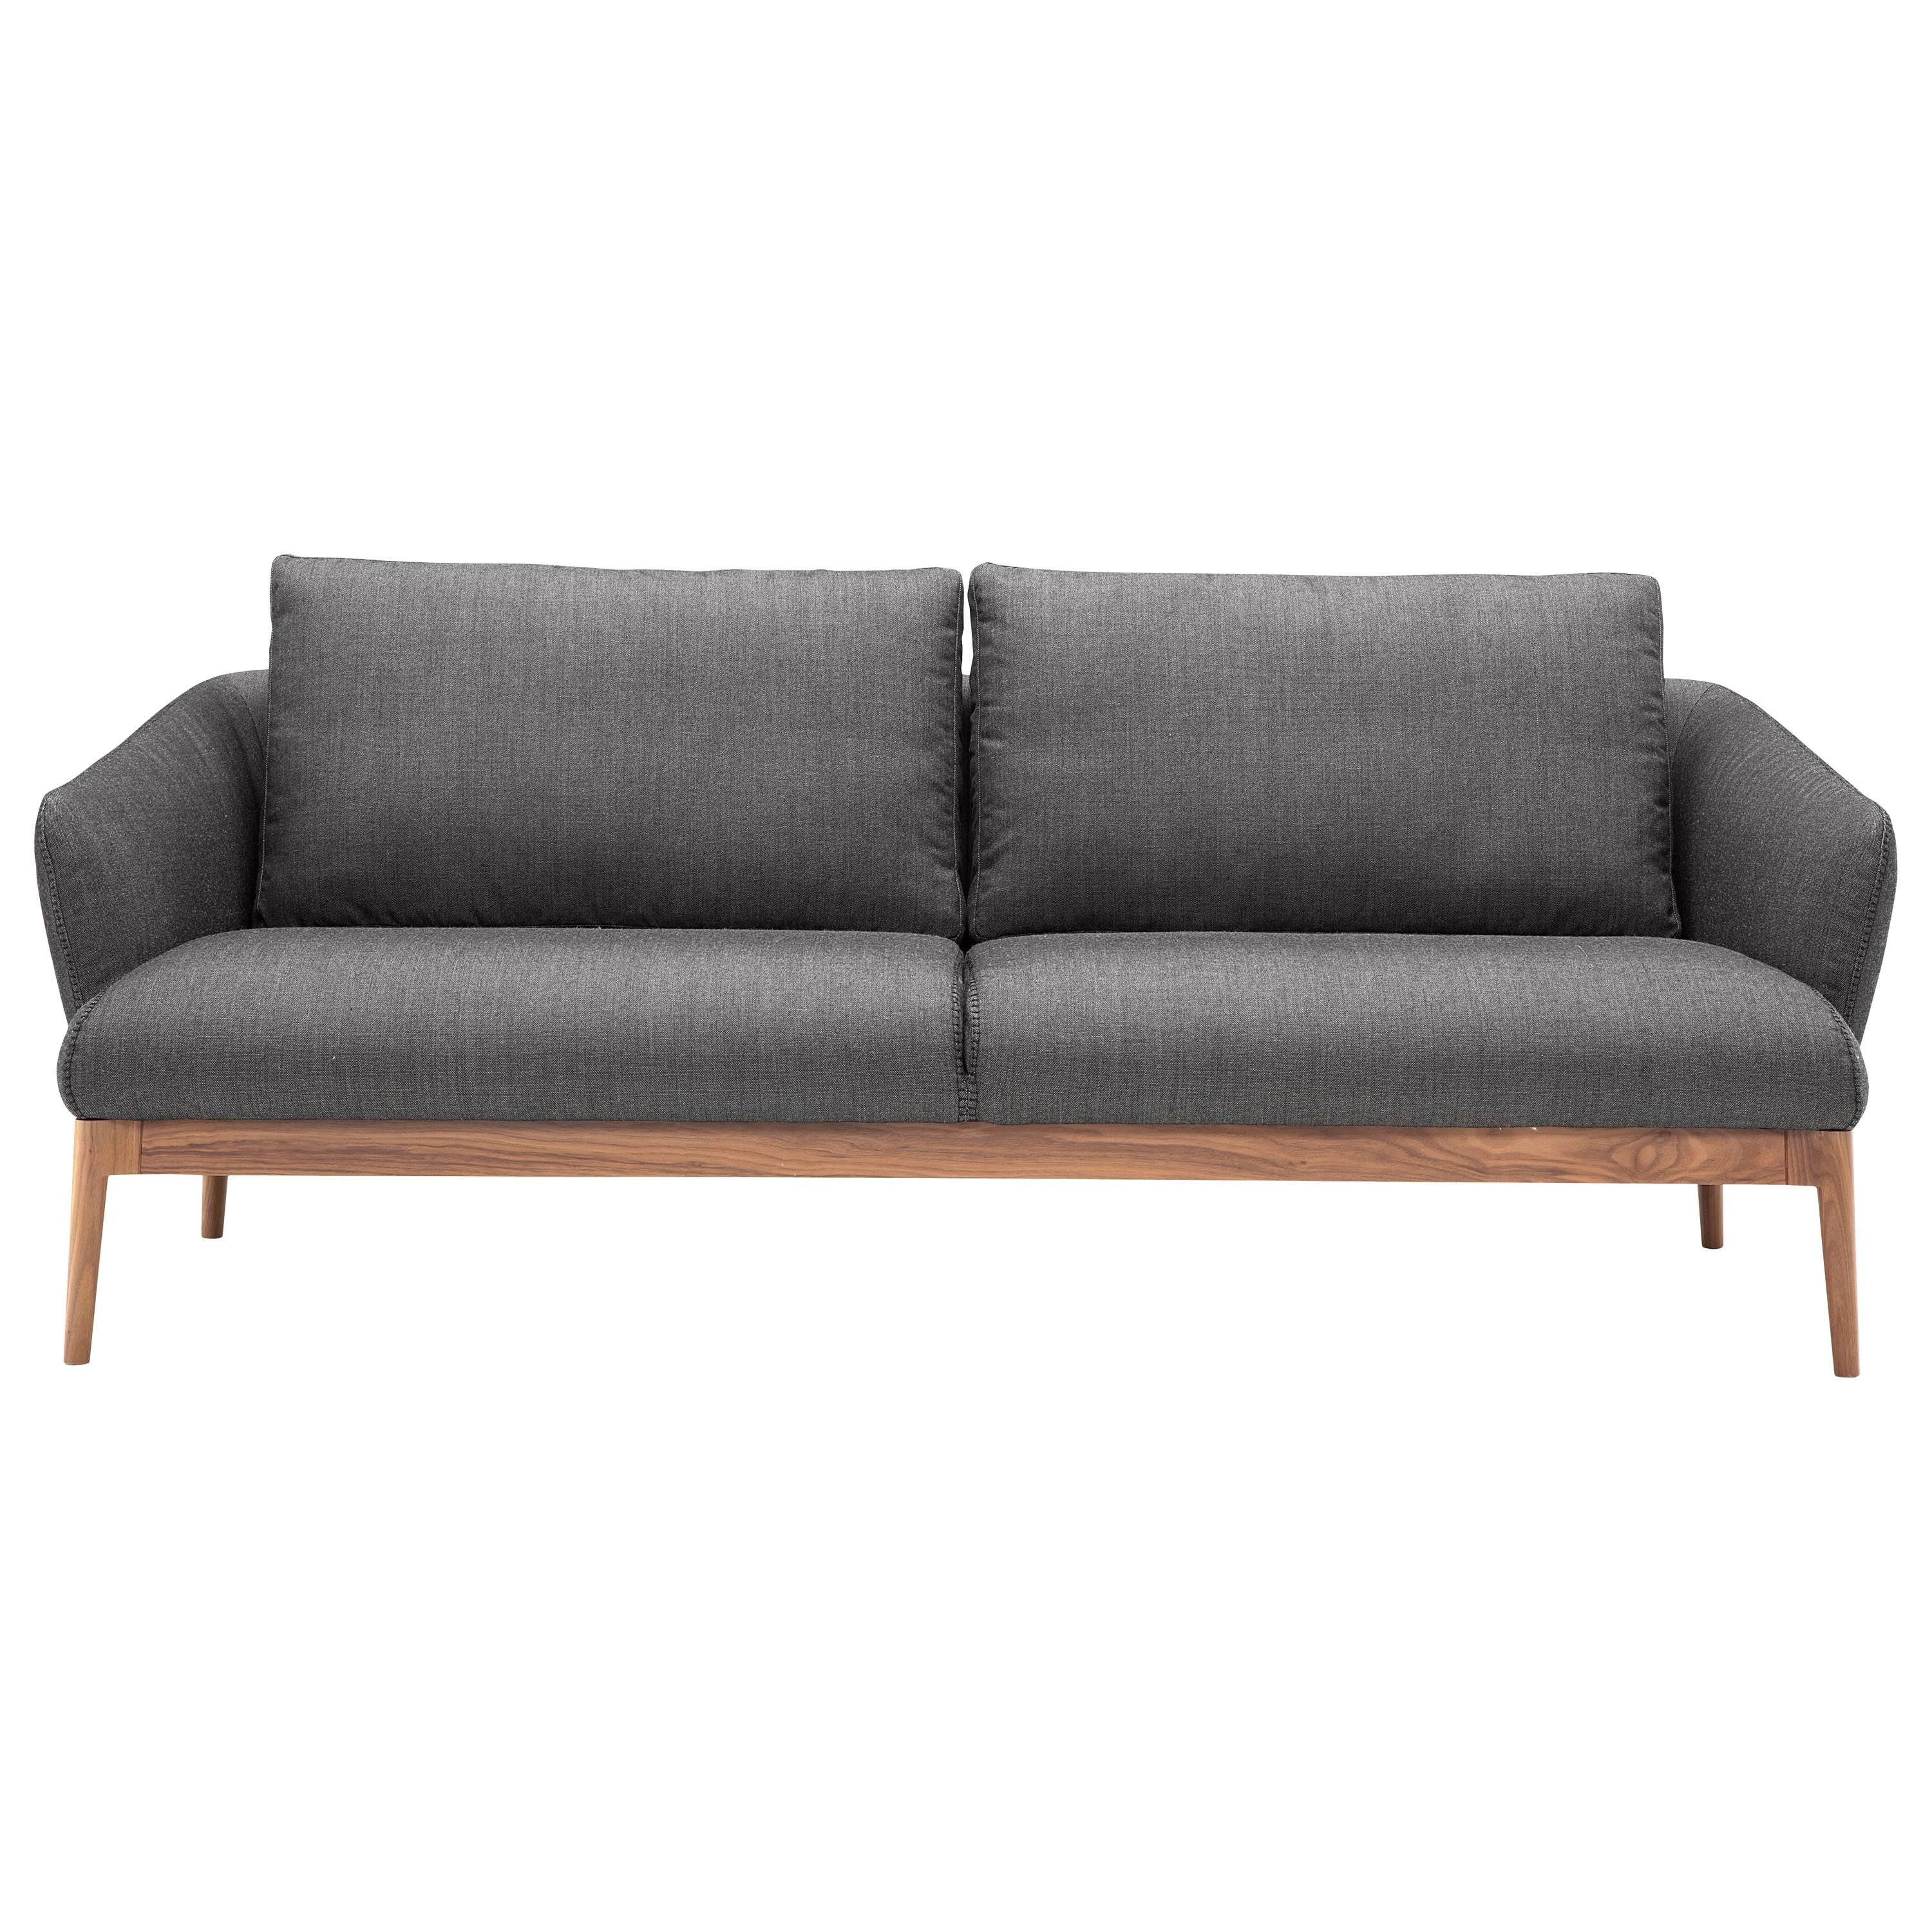 Theo Sofa in Charcoal Gray by Maurizio Marconato & Terry Zappa For Sale